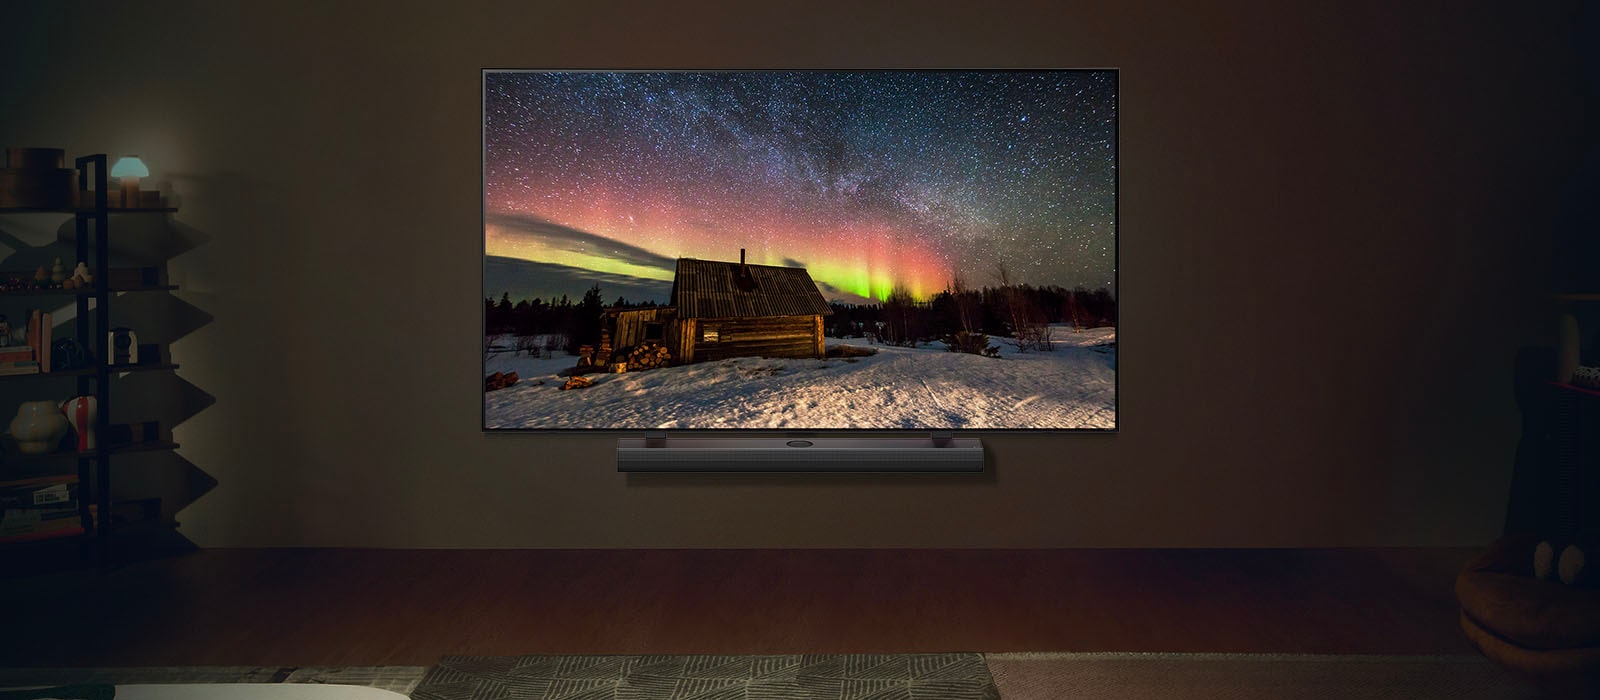 An image of an LG TV and LG Soundbar in a modern living space in nighttime. The image of the aurora borealis is displayed with the ideal brightness levels.